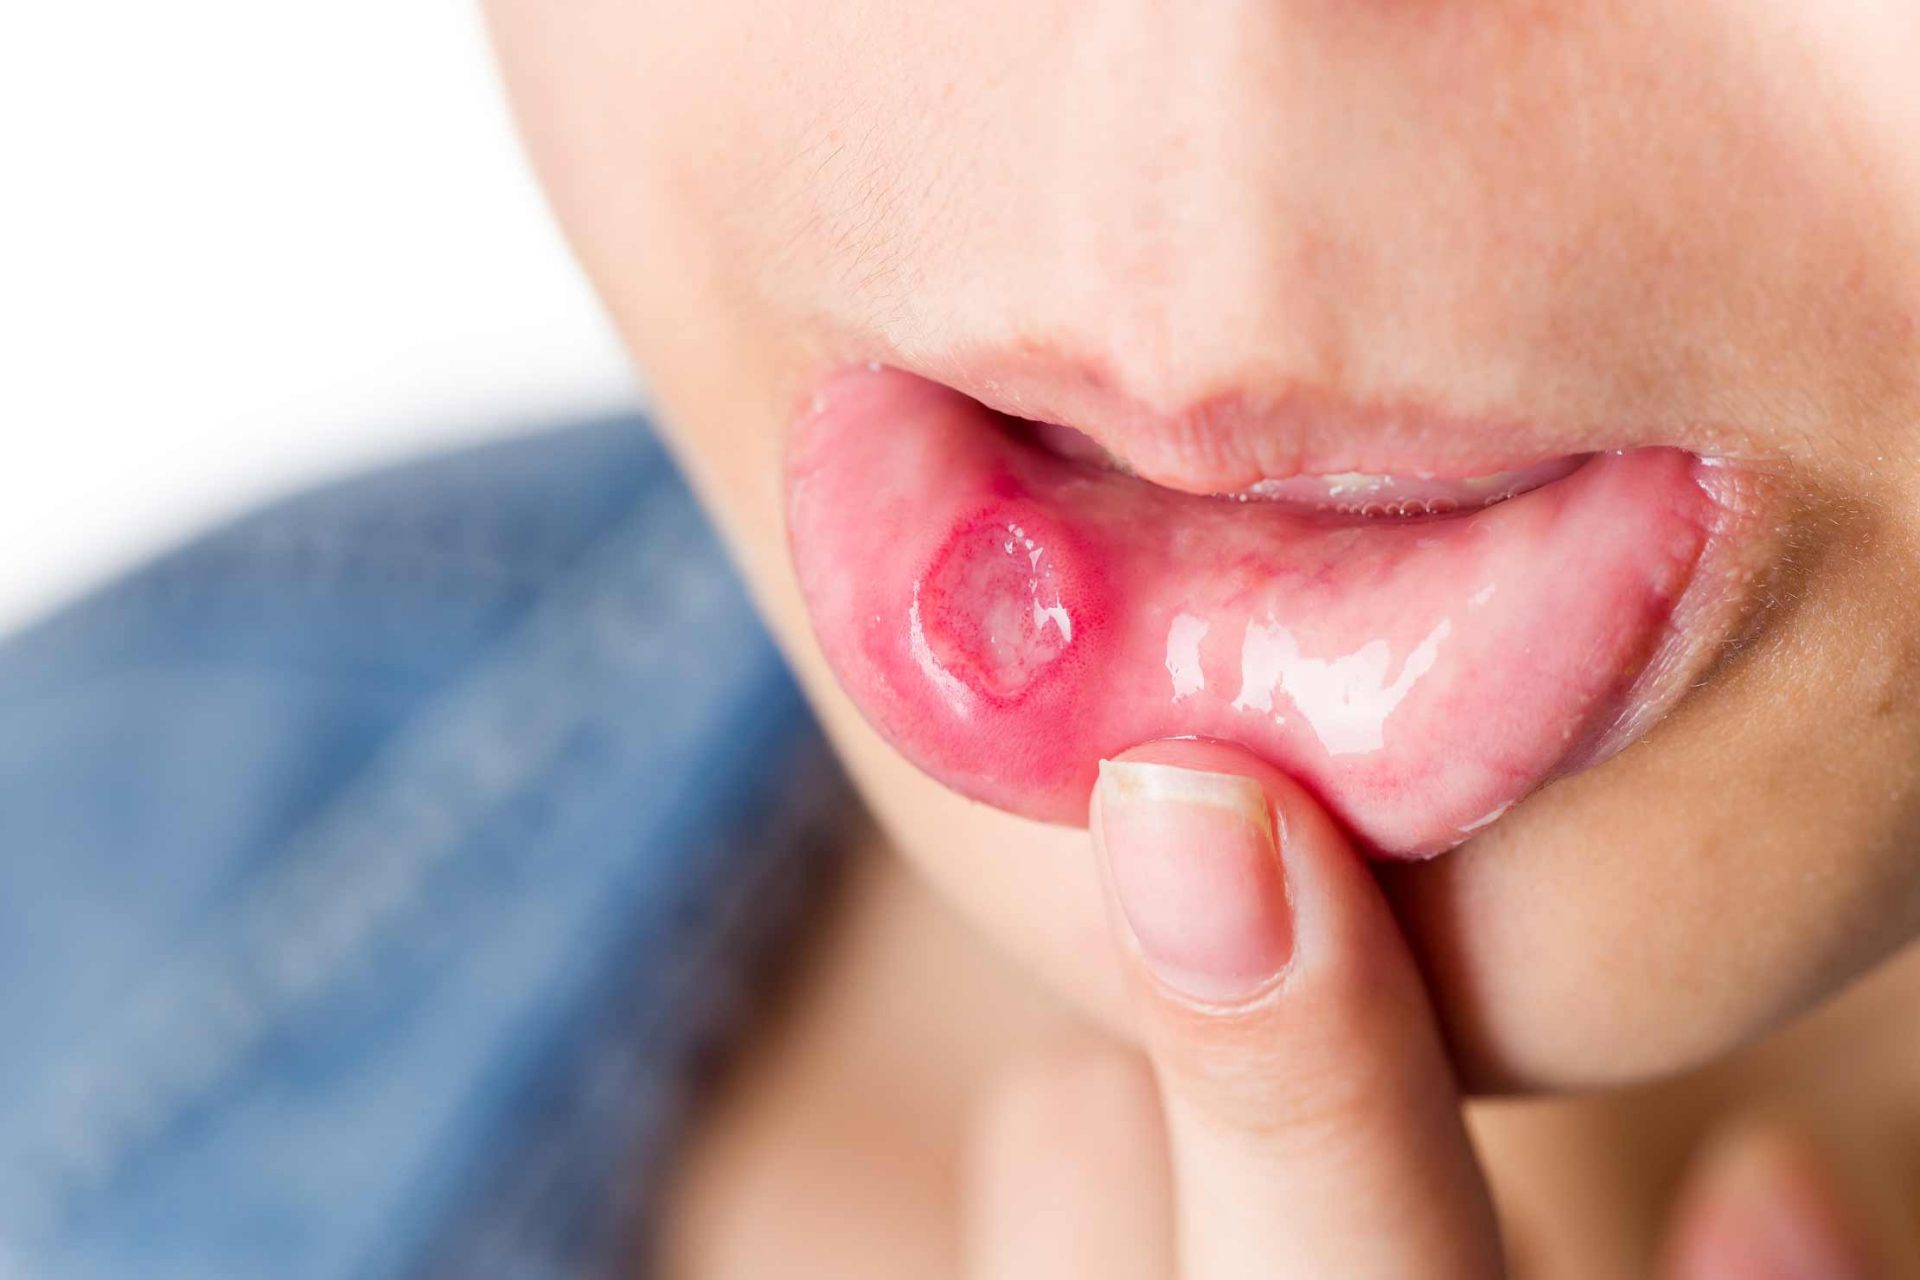 mouth ulcer treatment